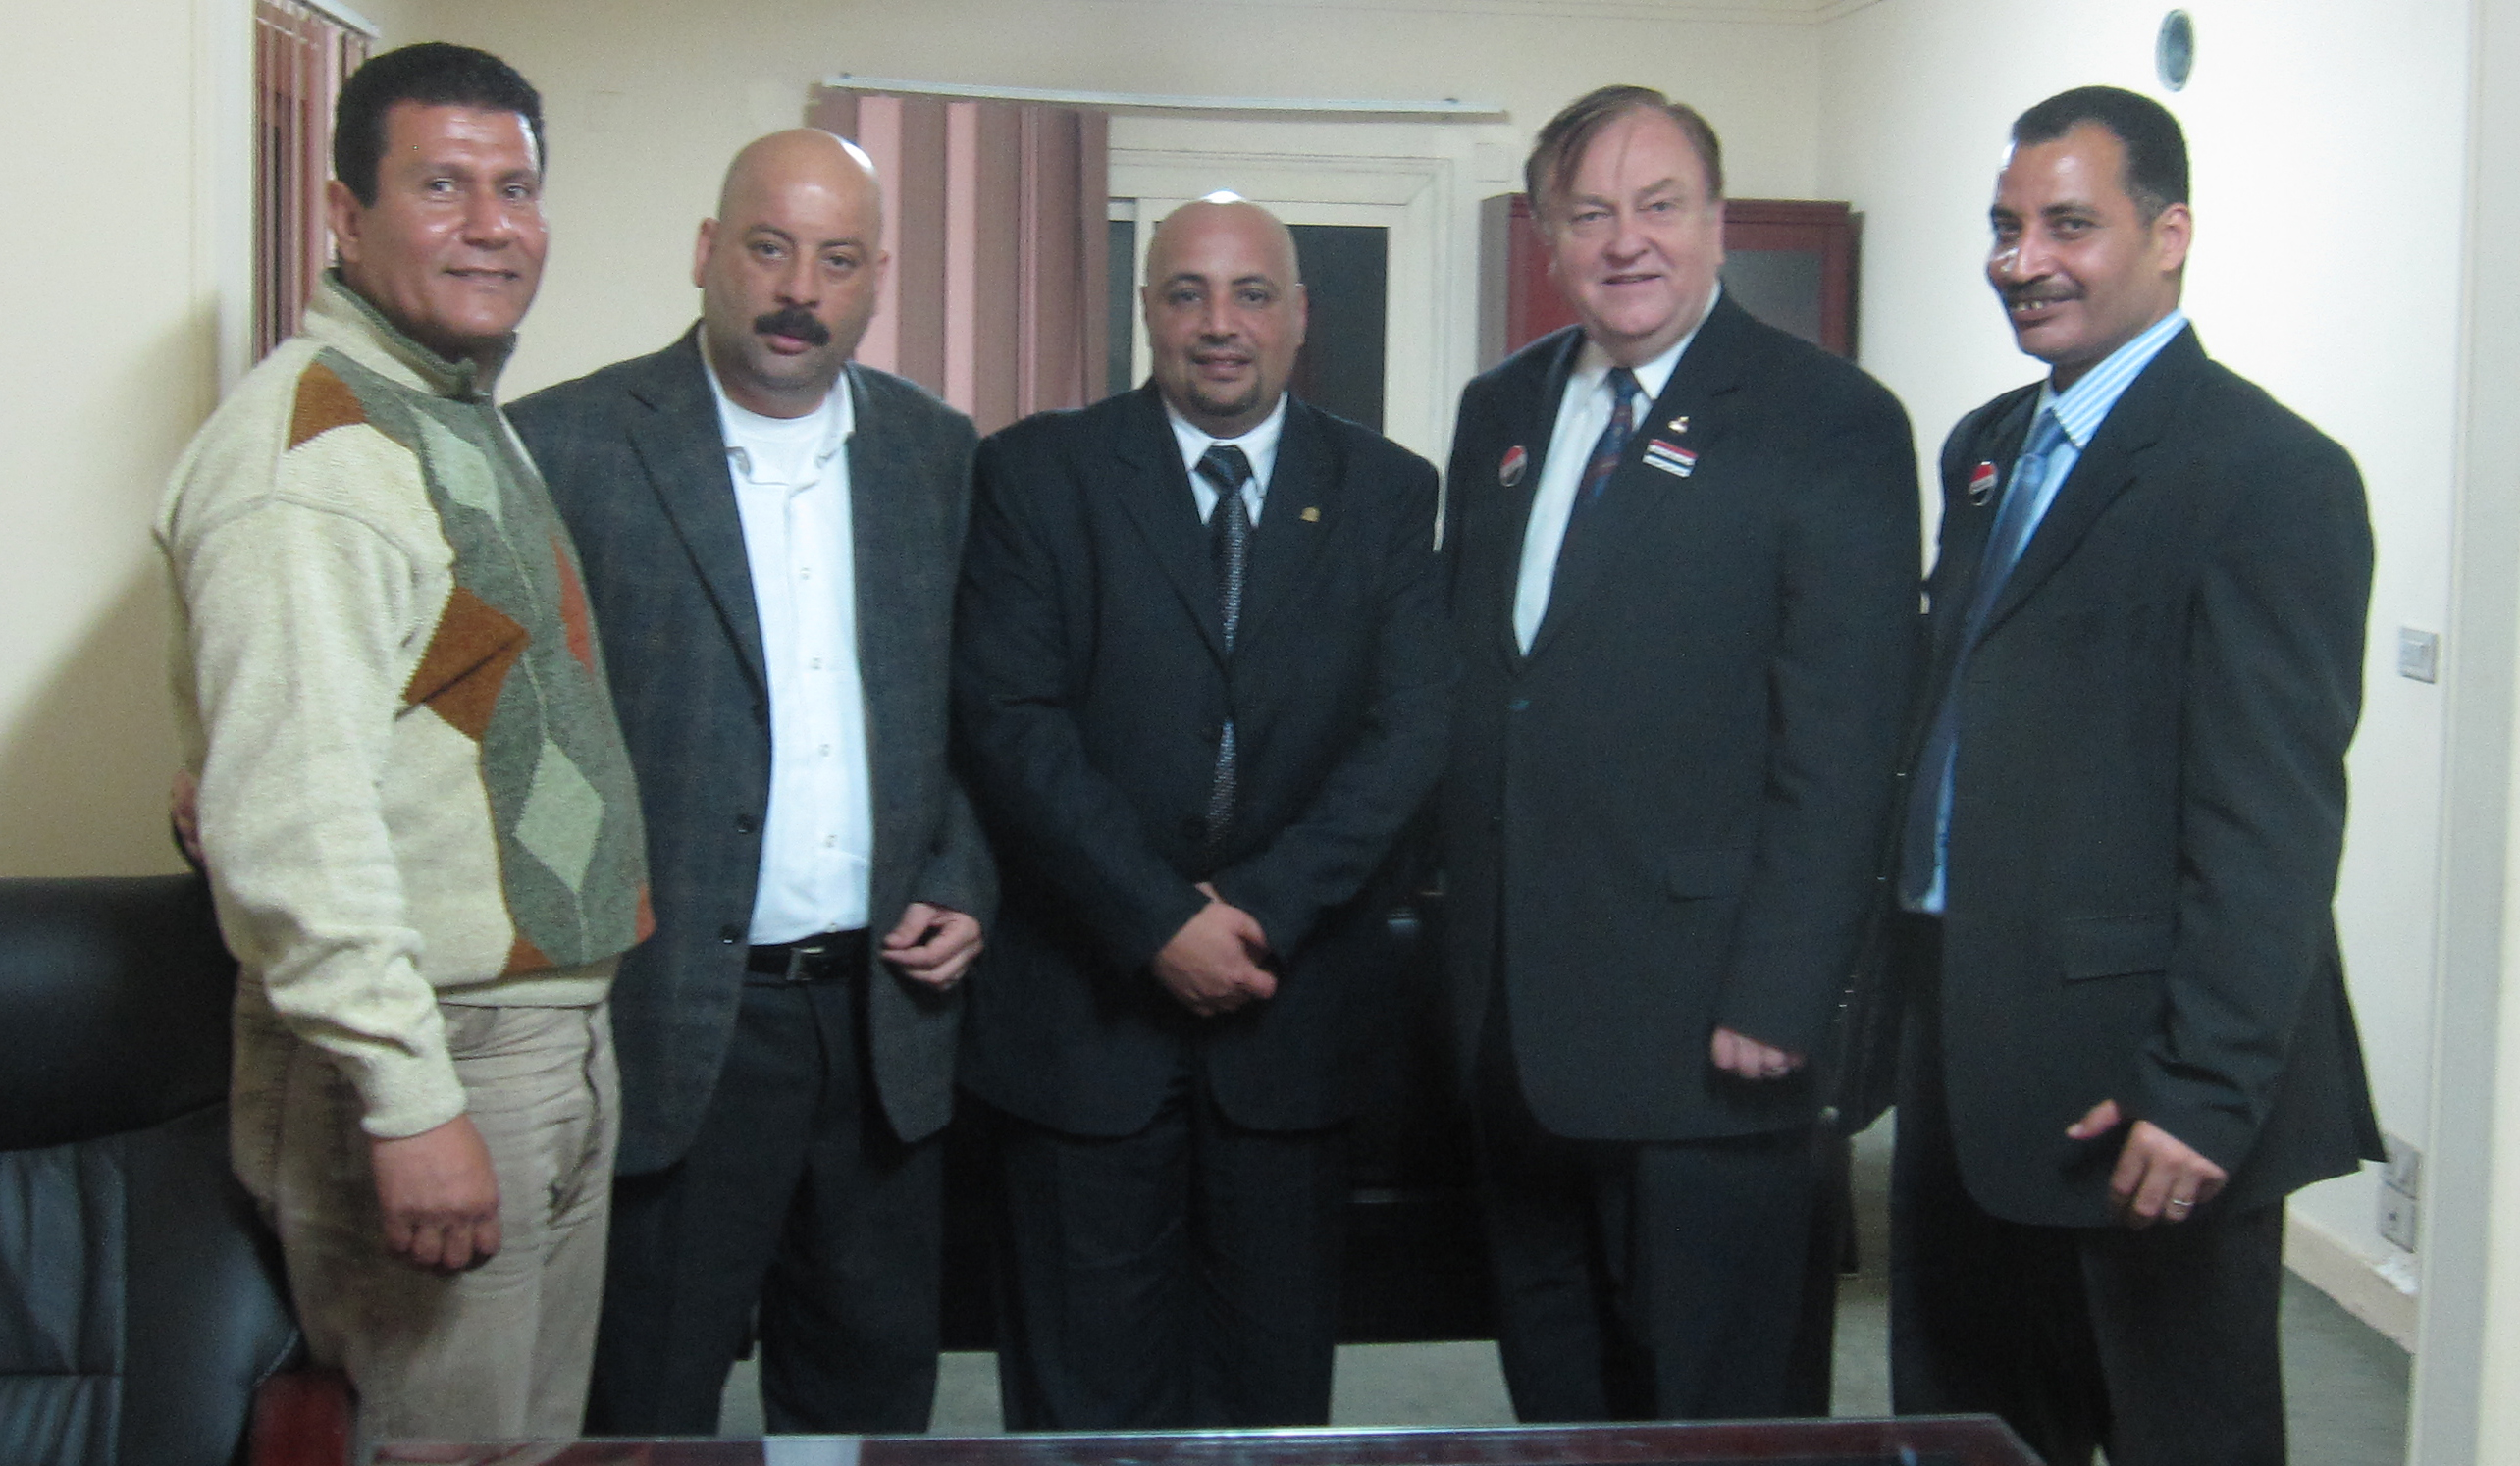 March 29, 2011: L-R Mr. Atef Taha, Mr. Yasser Nasreddine, Dr. Amr Hussein, Mr. David Swingler, and Mr. Adel Metwally - Joined in commitment to Egypt's Future!